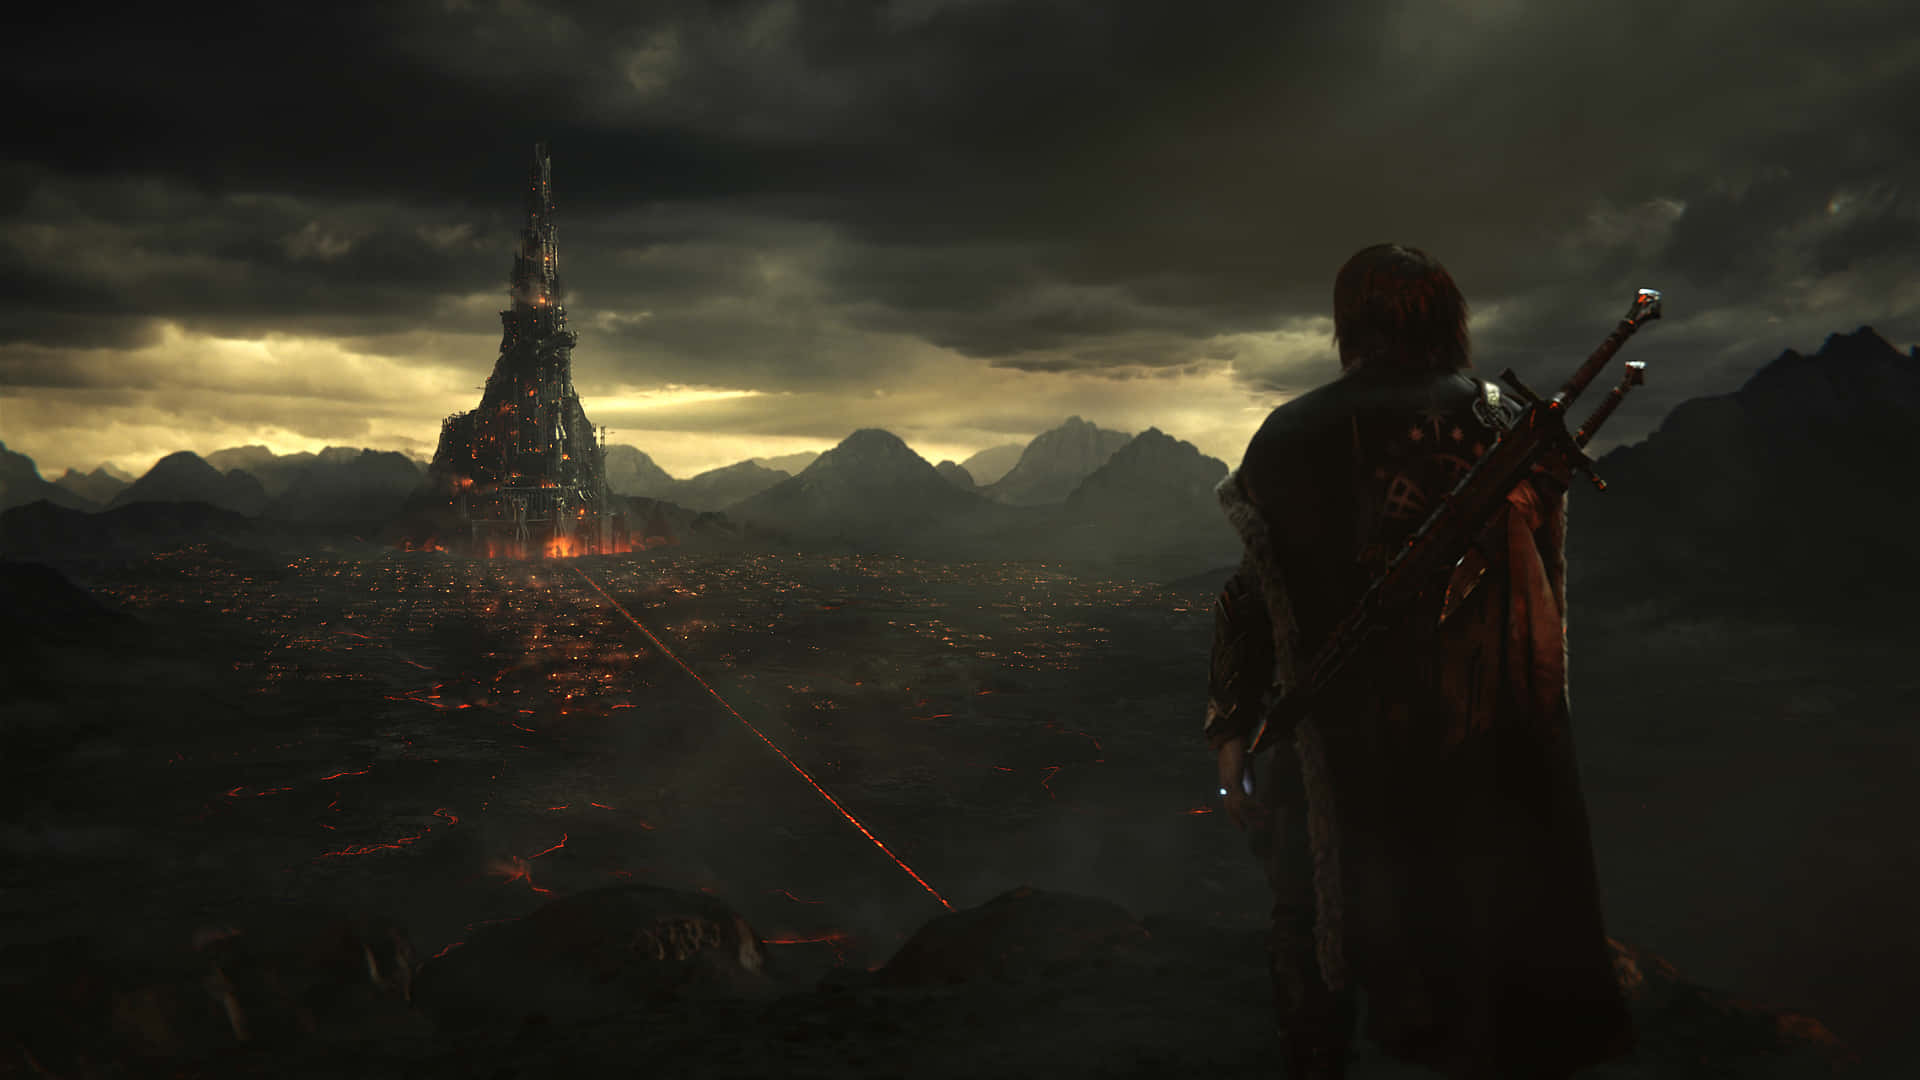 A Man Is Standing On A Mountain Looking At The Tower Of The Lord Of The Rings